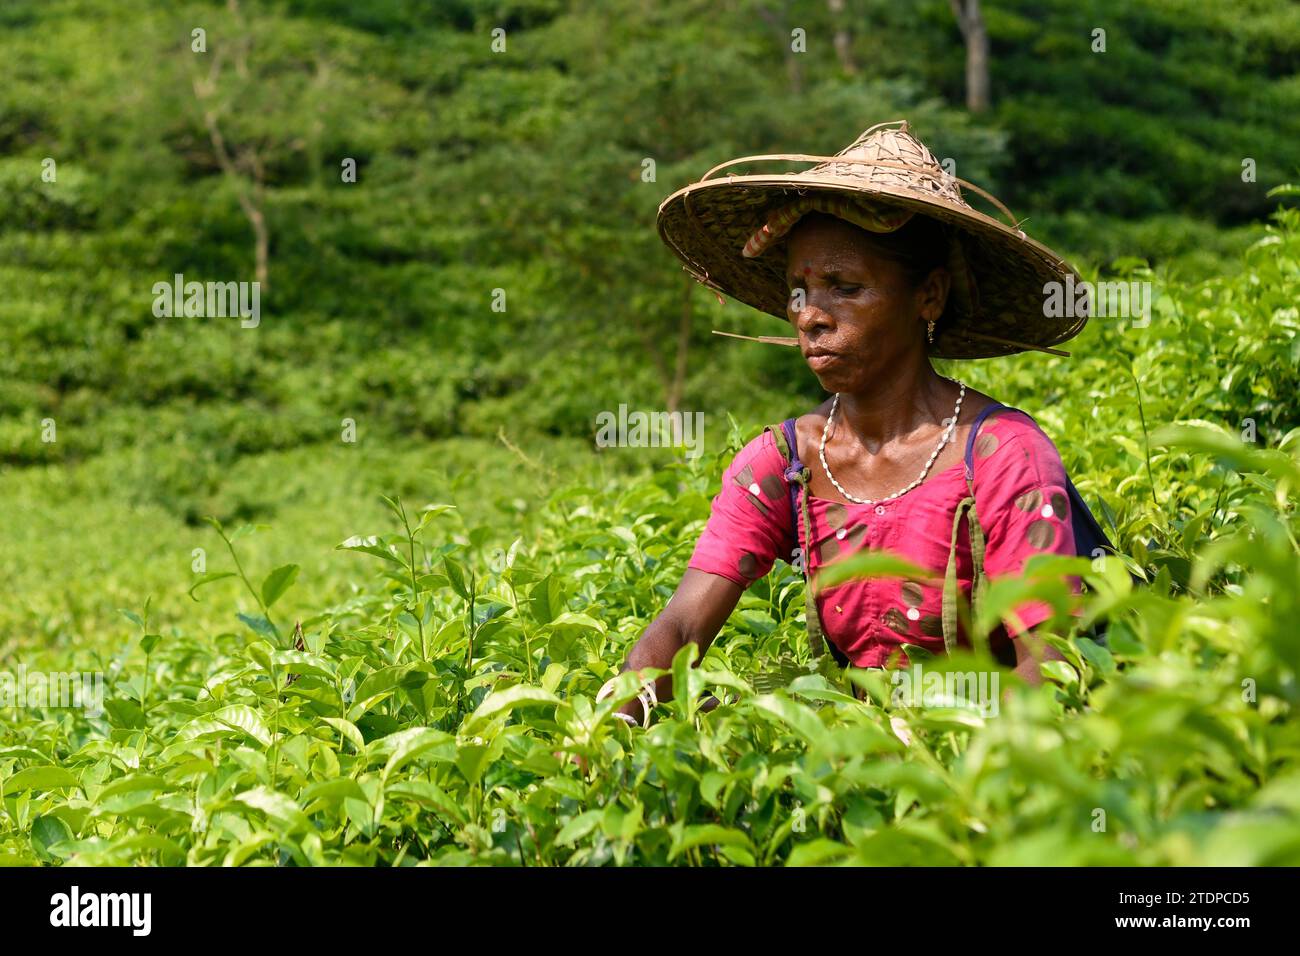 A female worker seen plucking tea leaves at the tea garden in Moulvibazar. Tea Plucking is a specialized skill. Two leaves and a bud need to be plucked in order to get the best taste and profitability. The calculation of daily wage is 170tk (1.60$) for plucking at least 22-23 kg leaves per day for a worker. The area of Sylhet has over 150 gardens including three of the largest tea gardens in the world both in the area. Nearly 300,000 workers are employed in the tea gardens of which over 75% are women. Working conditions and wages are considered to be very poor. (Photo by Piyas Biswas/SOPA Im Stock Photo